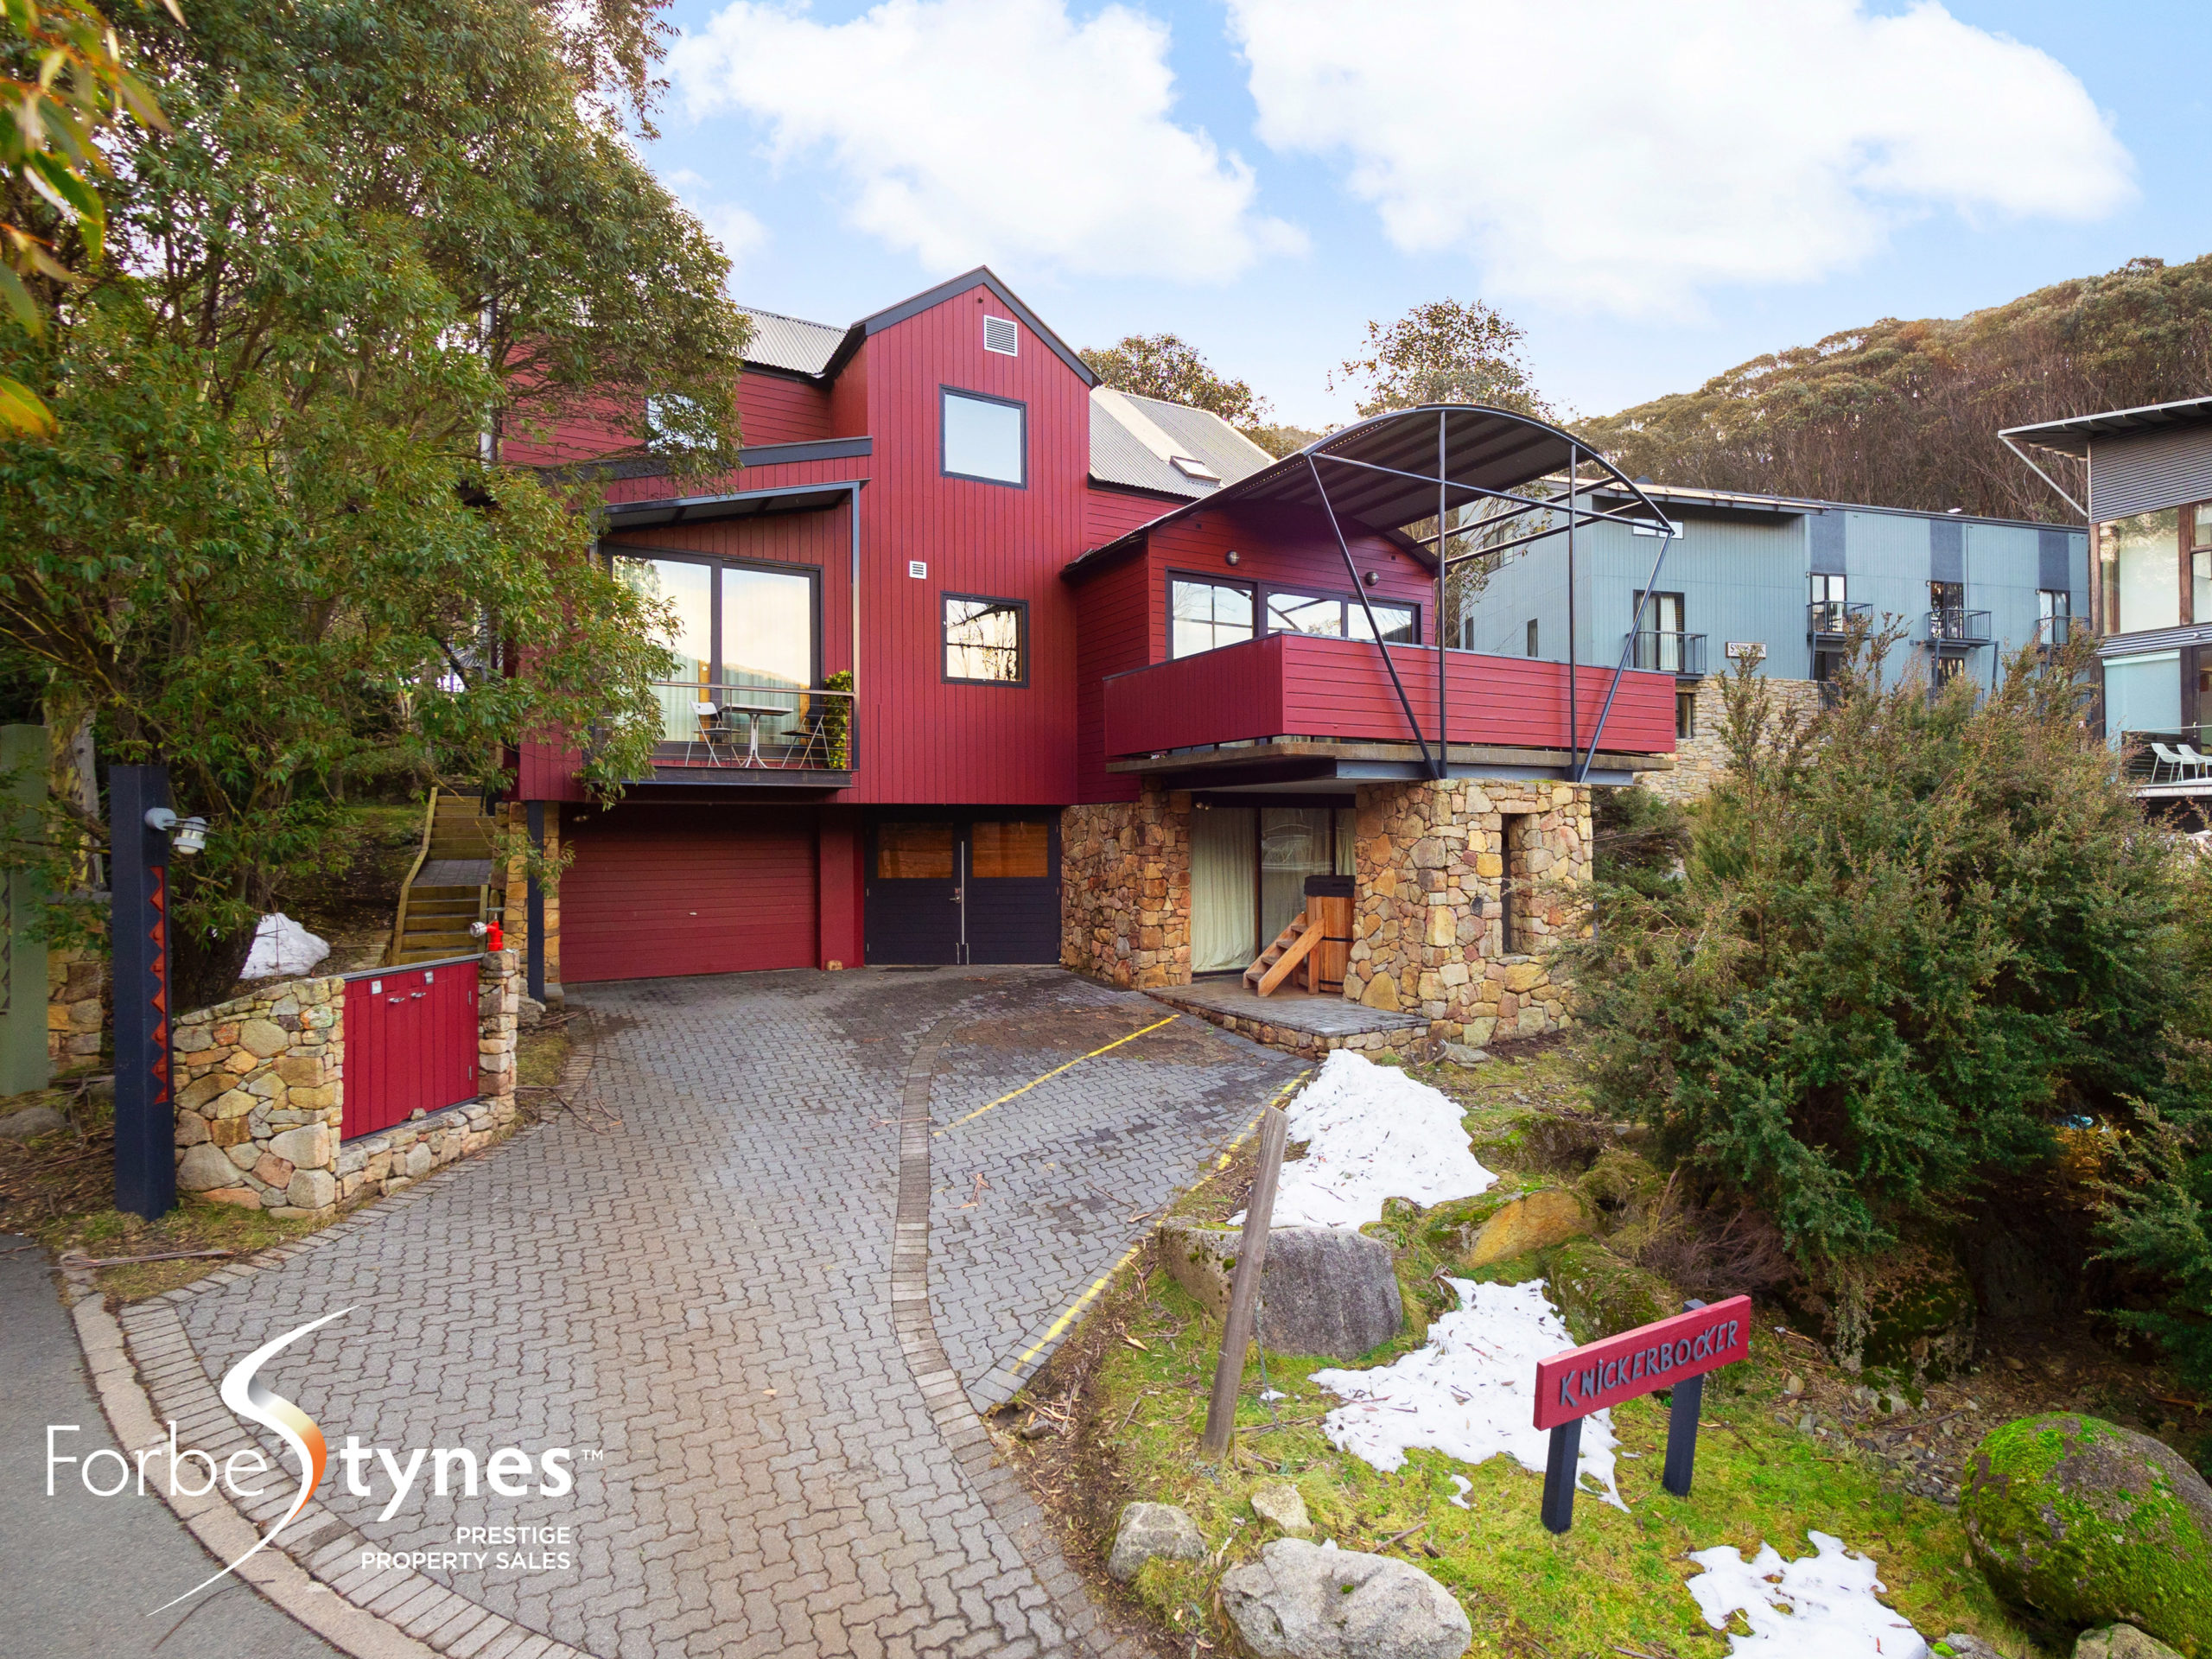 Large Stand-Alone Holiday Home with Self Contained Attached Apartment<br><br>Expressions of Interest over $3.5M